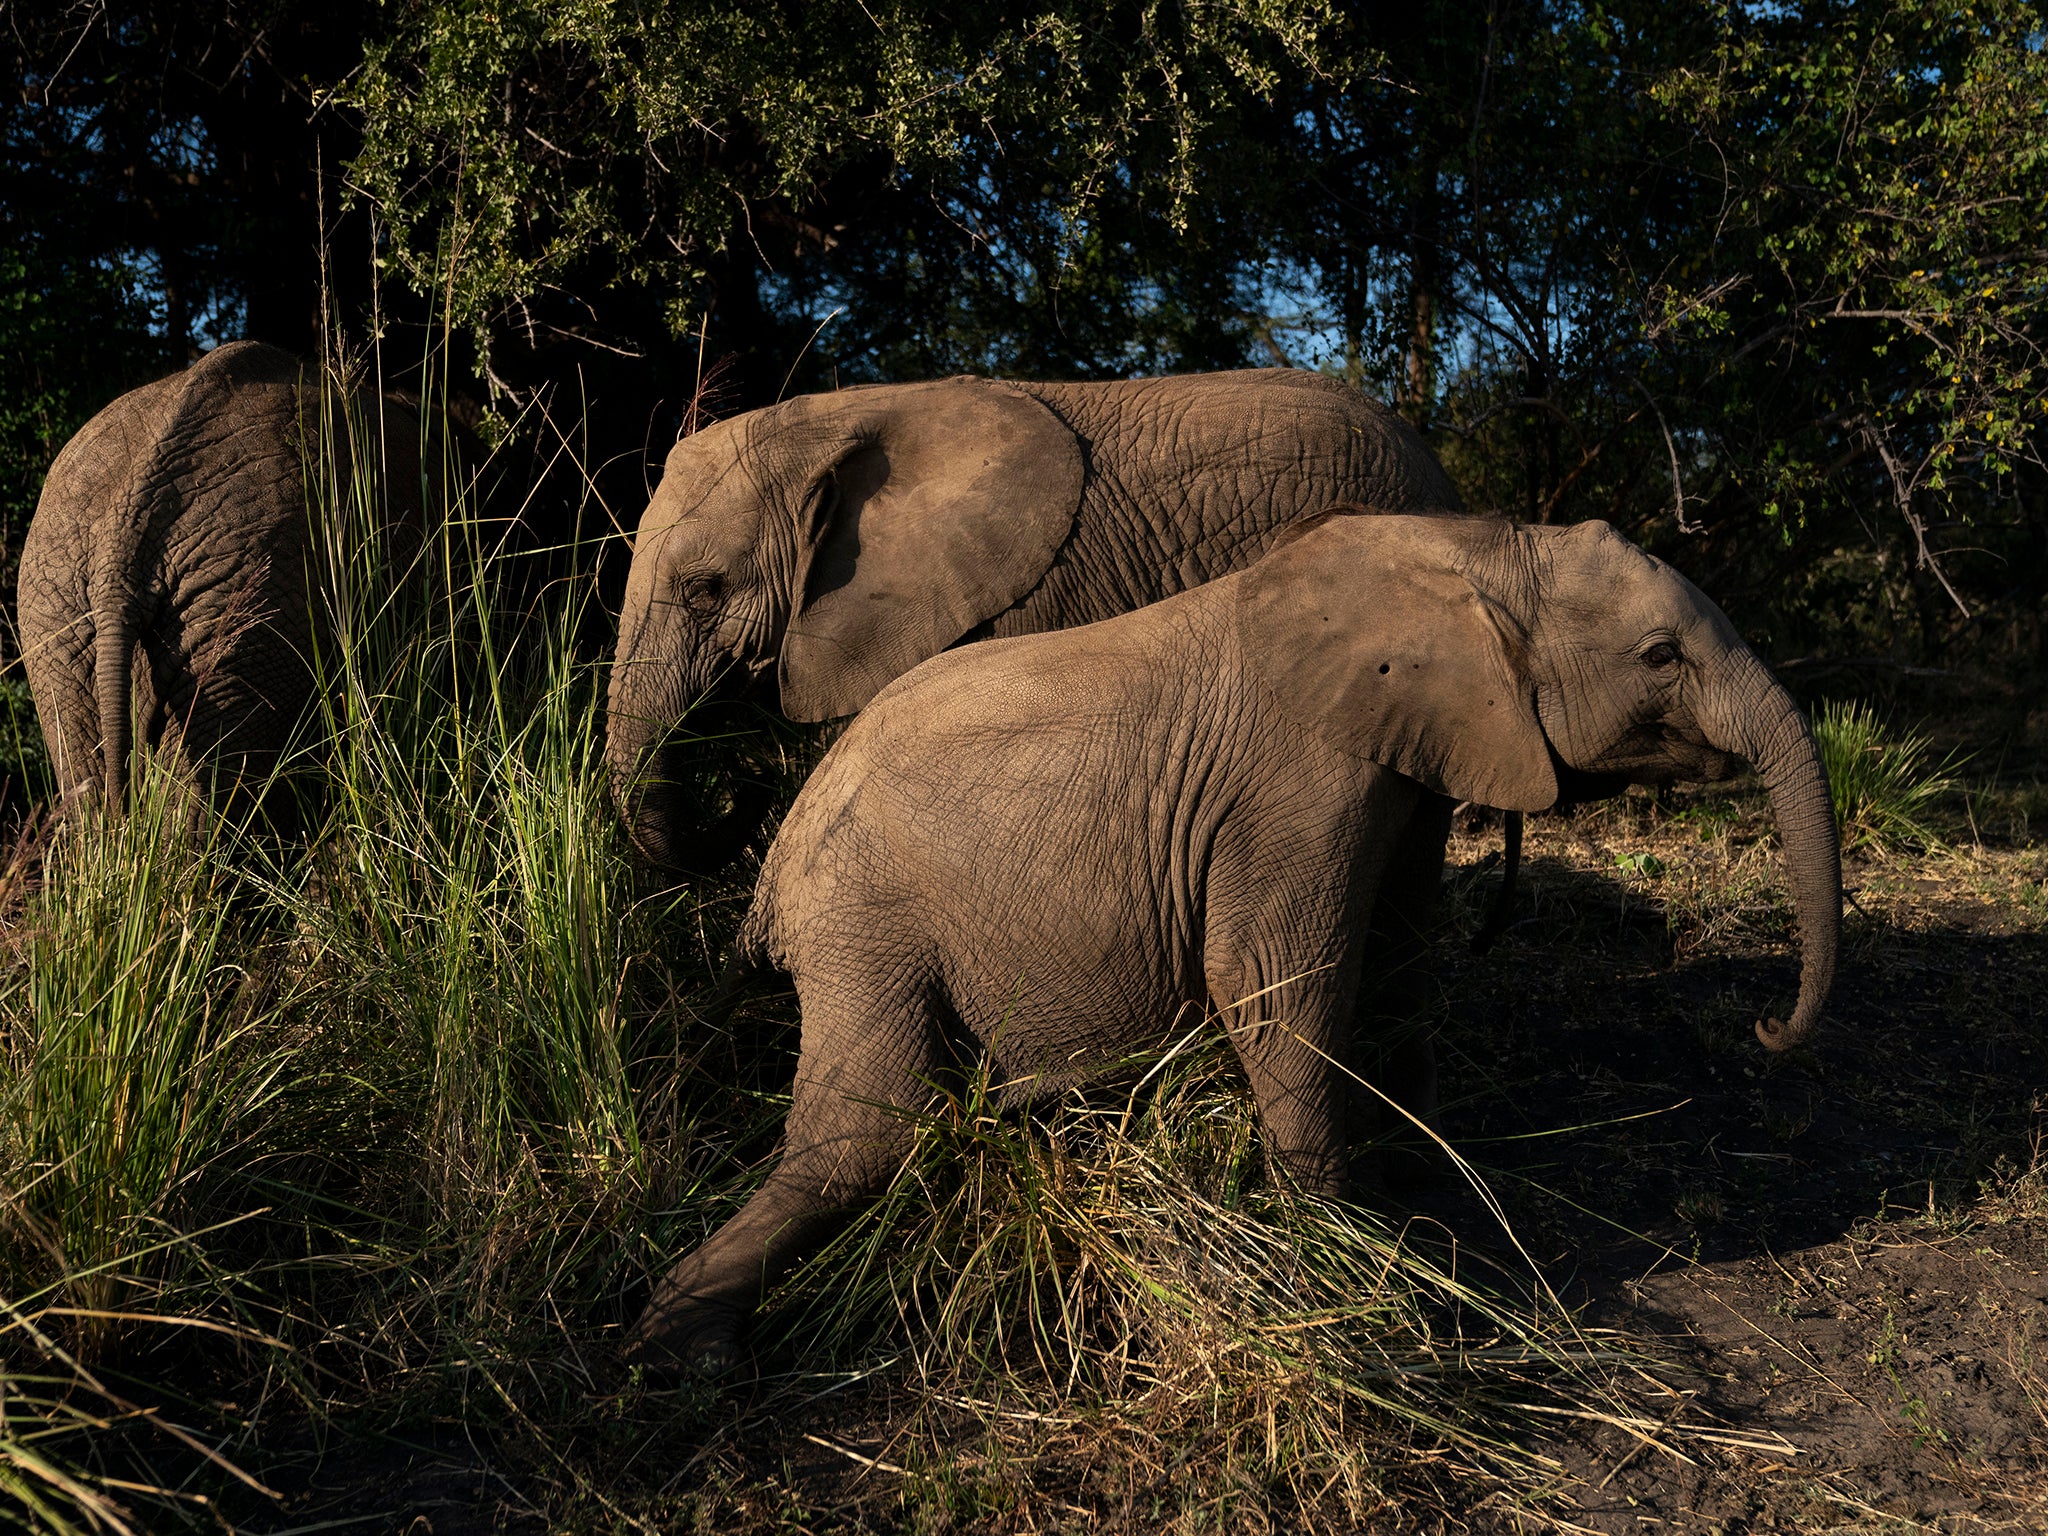 Molelo, Panda and Tuli eat and play in the grasses in the elephant orphanage at Elephants Without Borders in Kasane, Botswana.